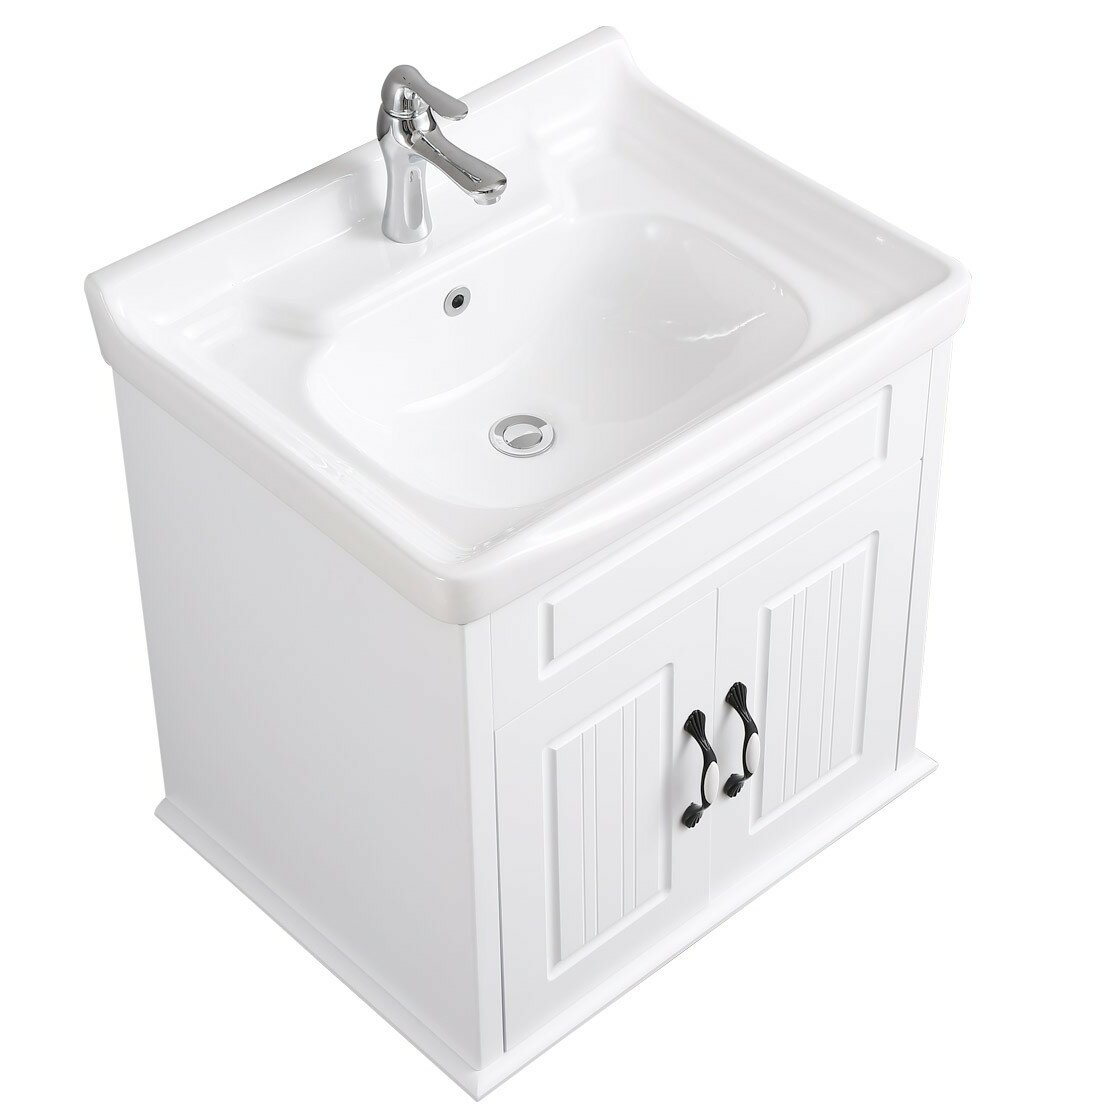 The Renovators Supply Inc Vitreous China Wood Square Drop In Bathroom Sink With Faucet And Overflow Wayfair